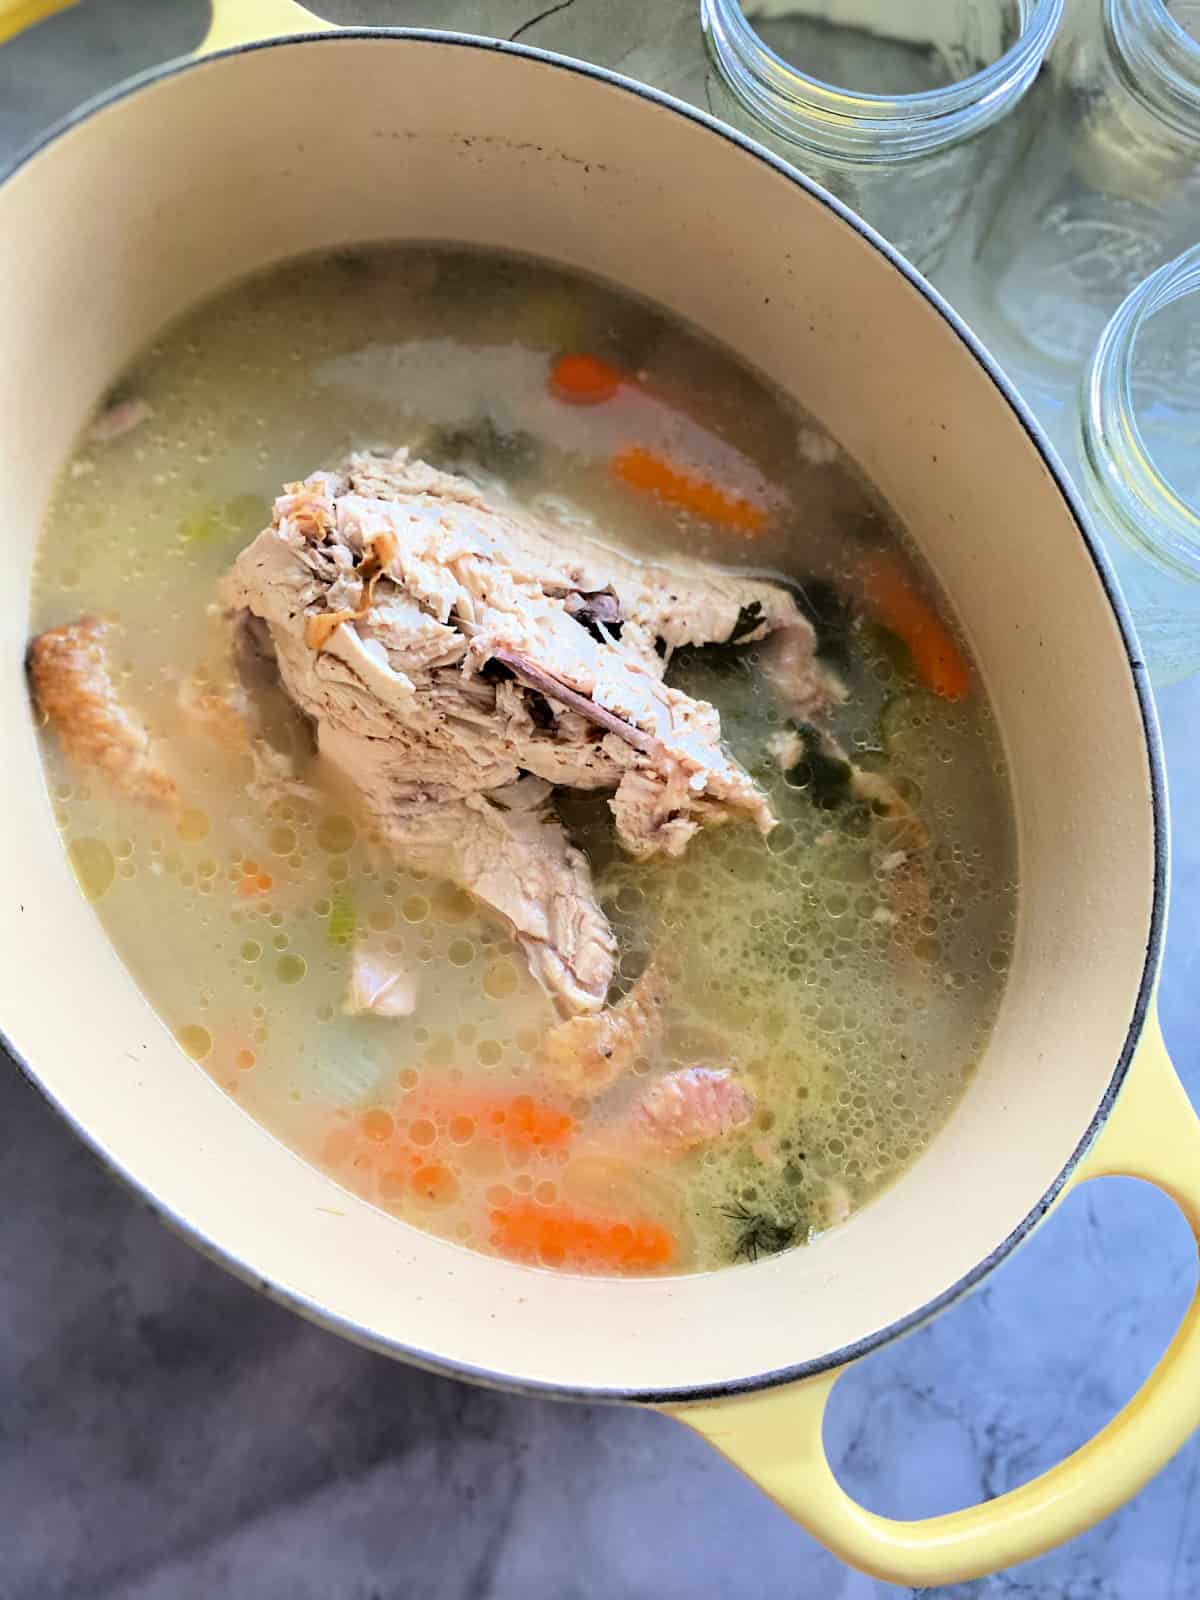 Rotisserie chicken carcass in pot with broth